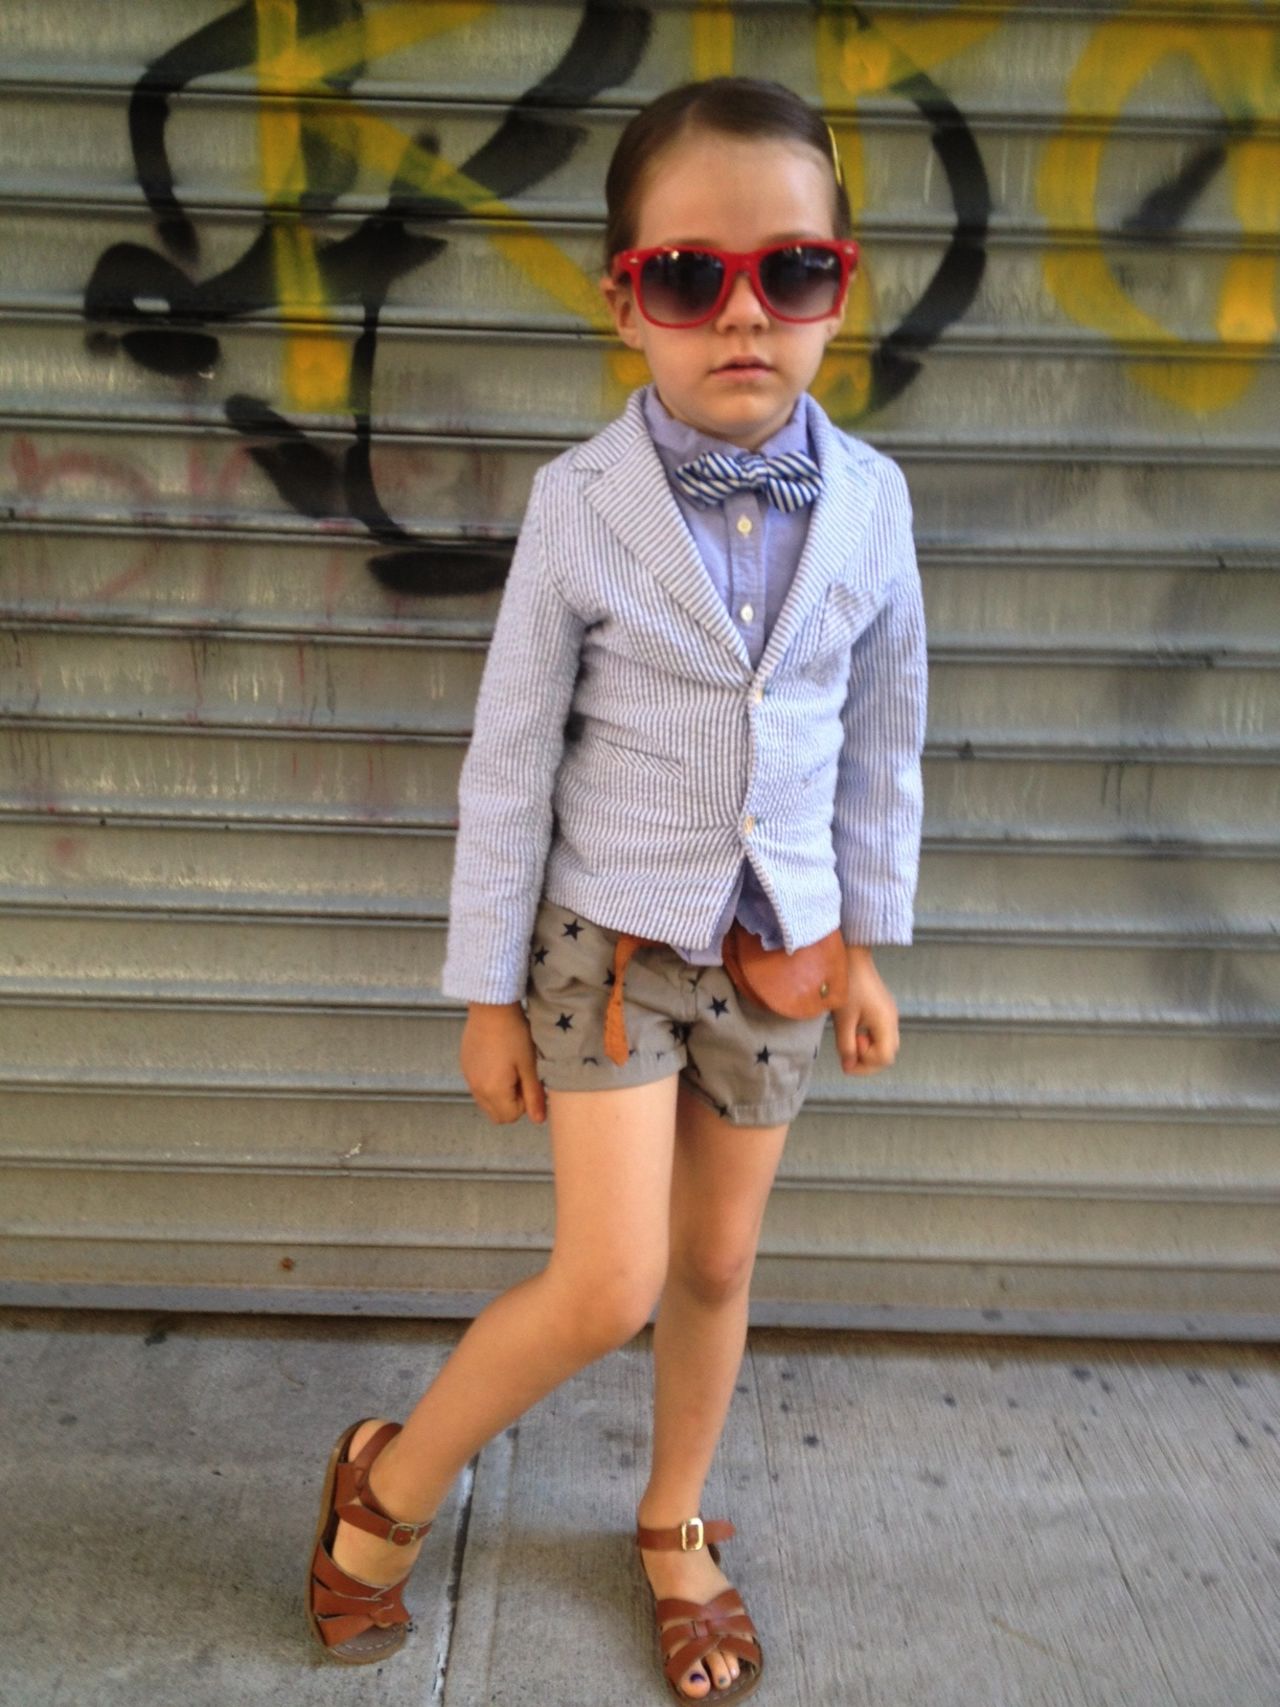 Planet Awesome Kid staff member Diane Vasil took this photo of her very stylish daughter.